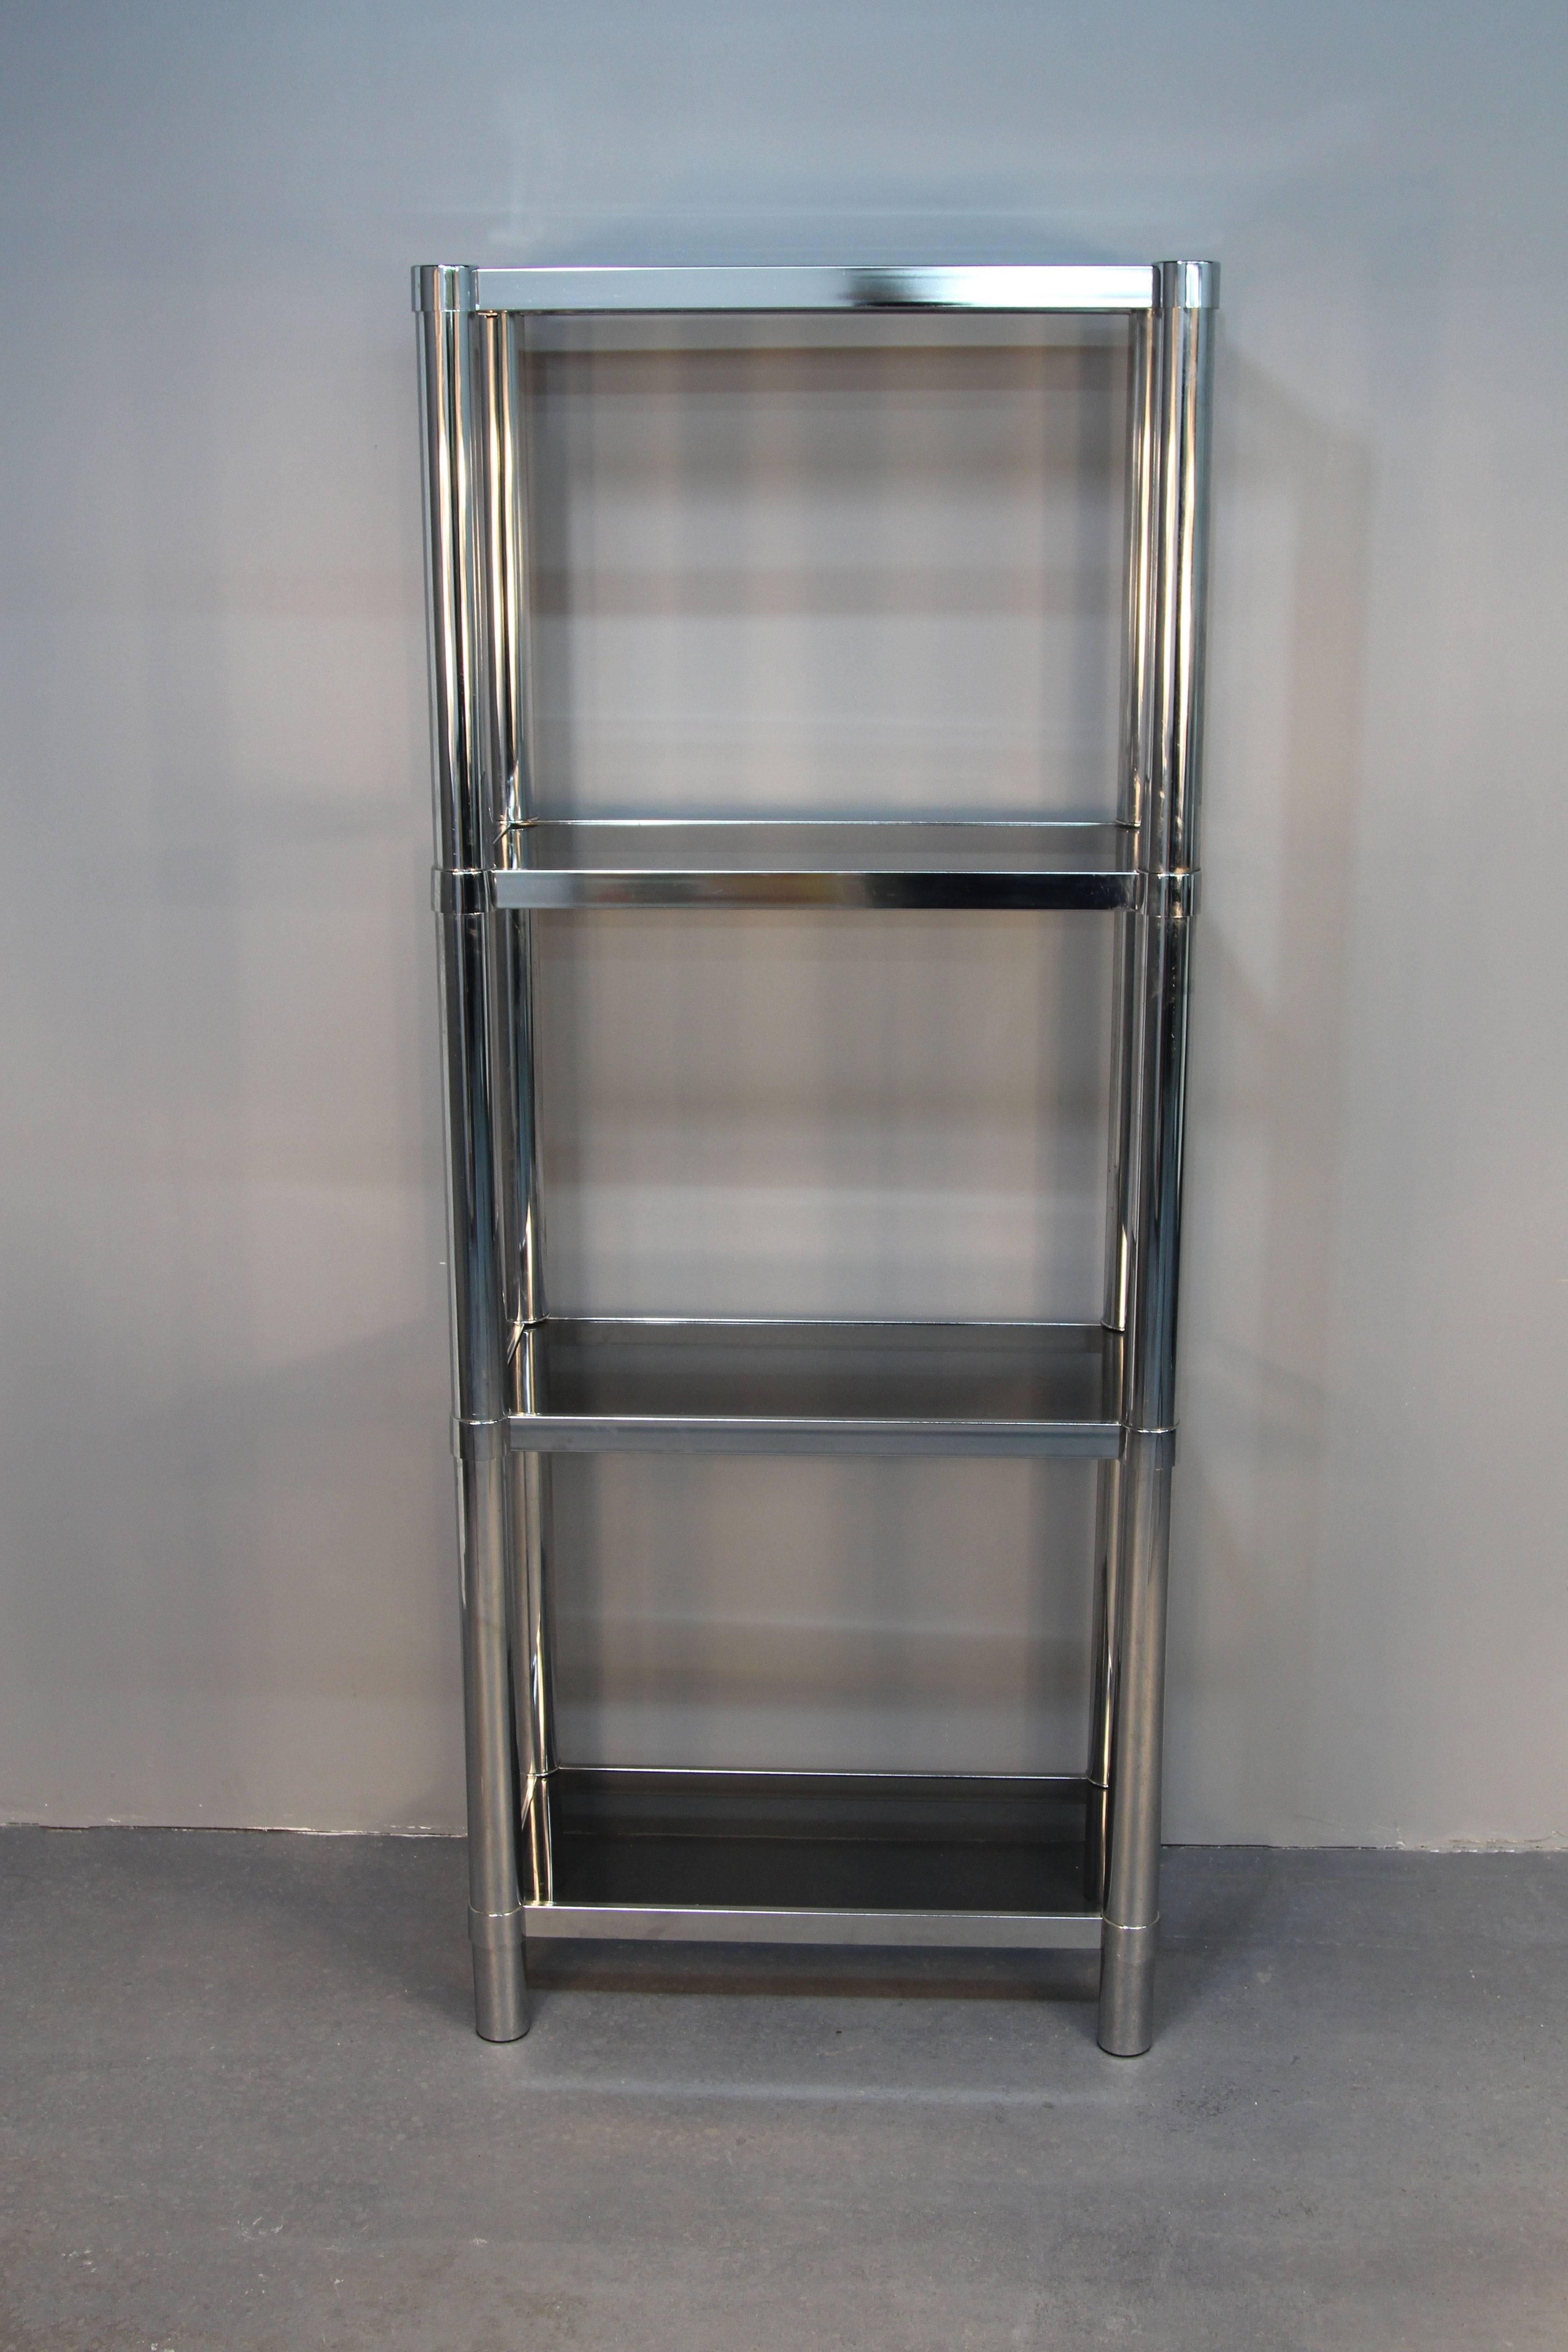 Amazing chrome tubular étagère. Four smoked glass shelves. Sections removable for height adjustment.

Single only, not pair!